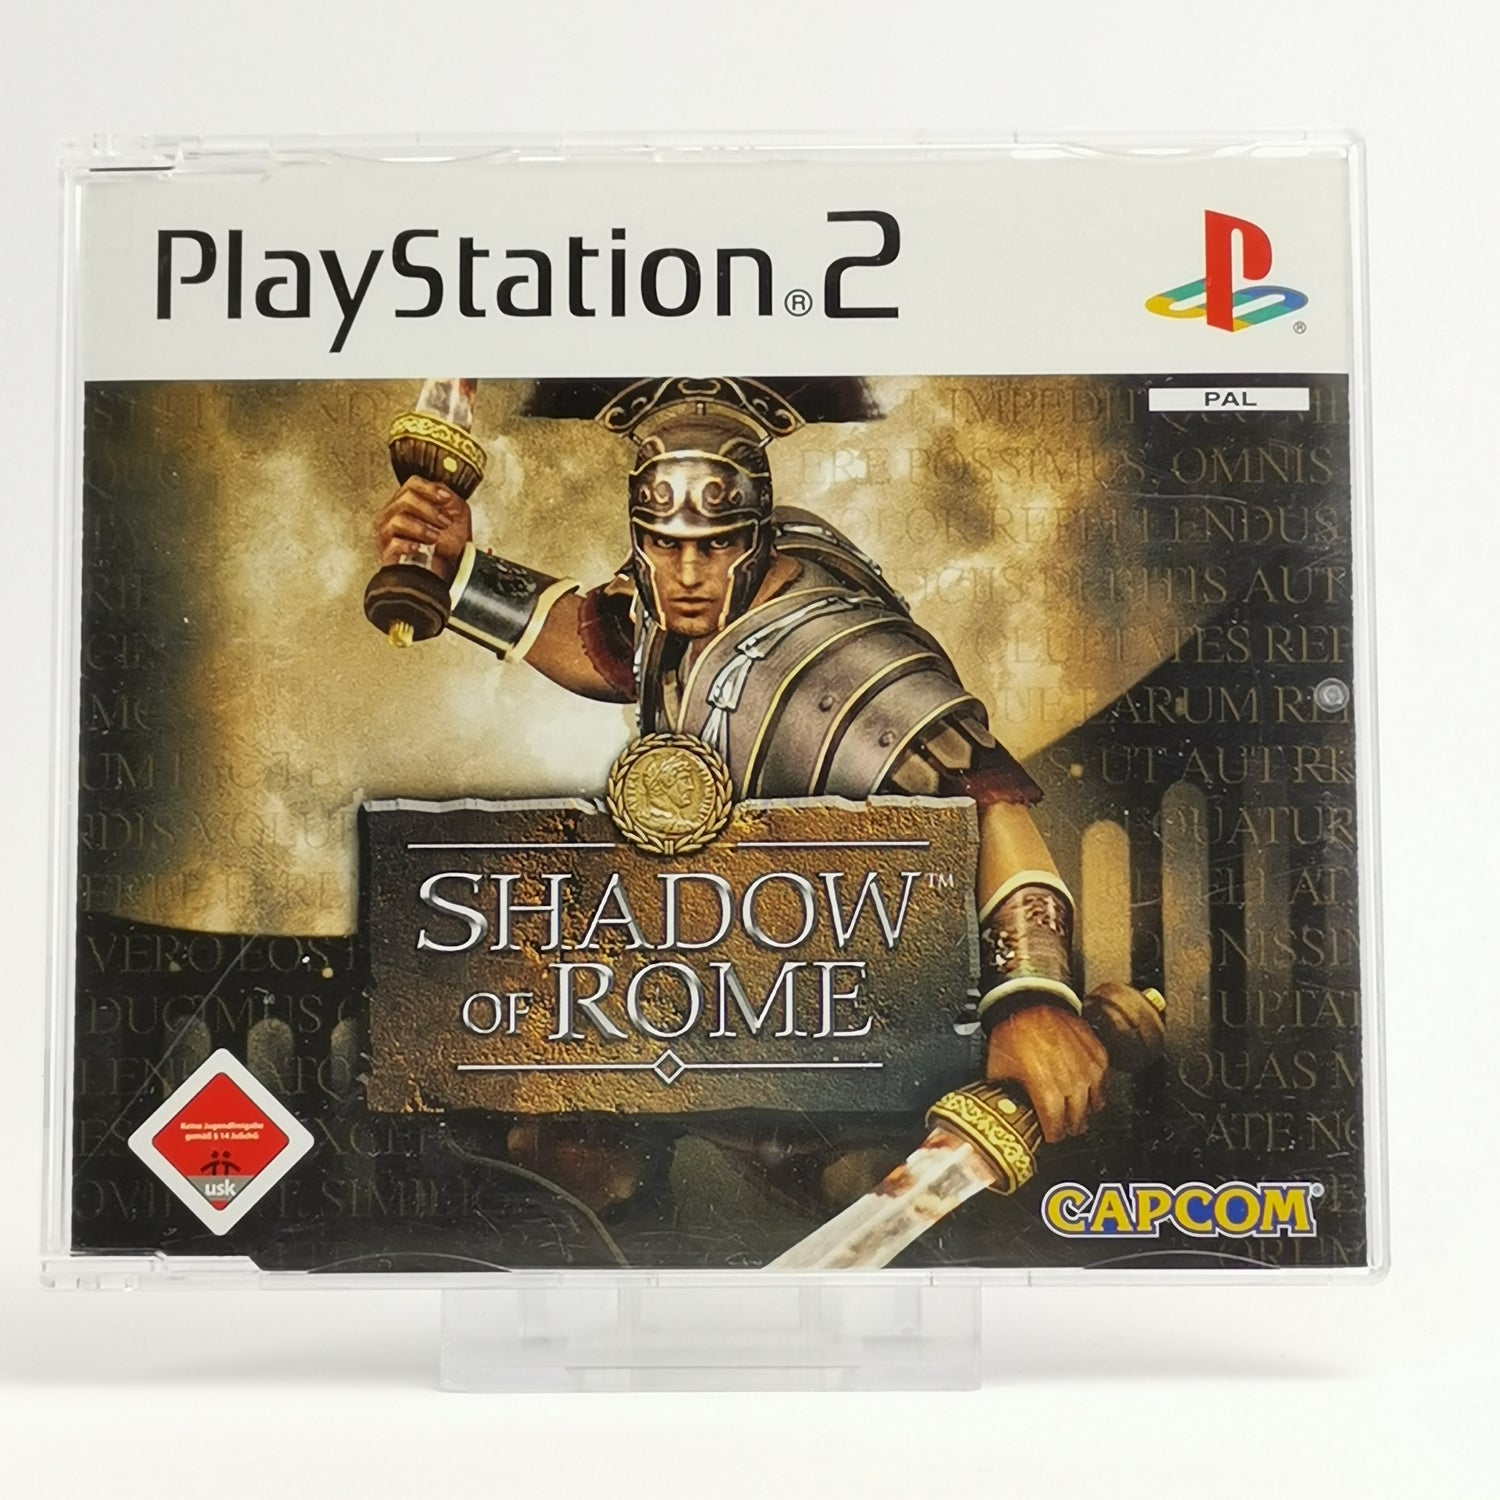 Sony Playstation 2 Promo Game: Shadow of Rome - Full Version | PS2 OVP PAL